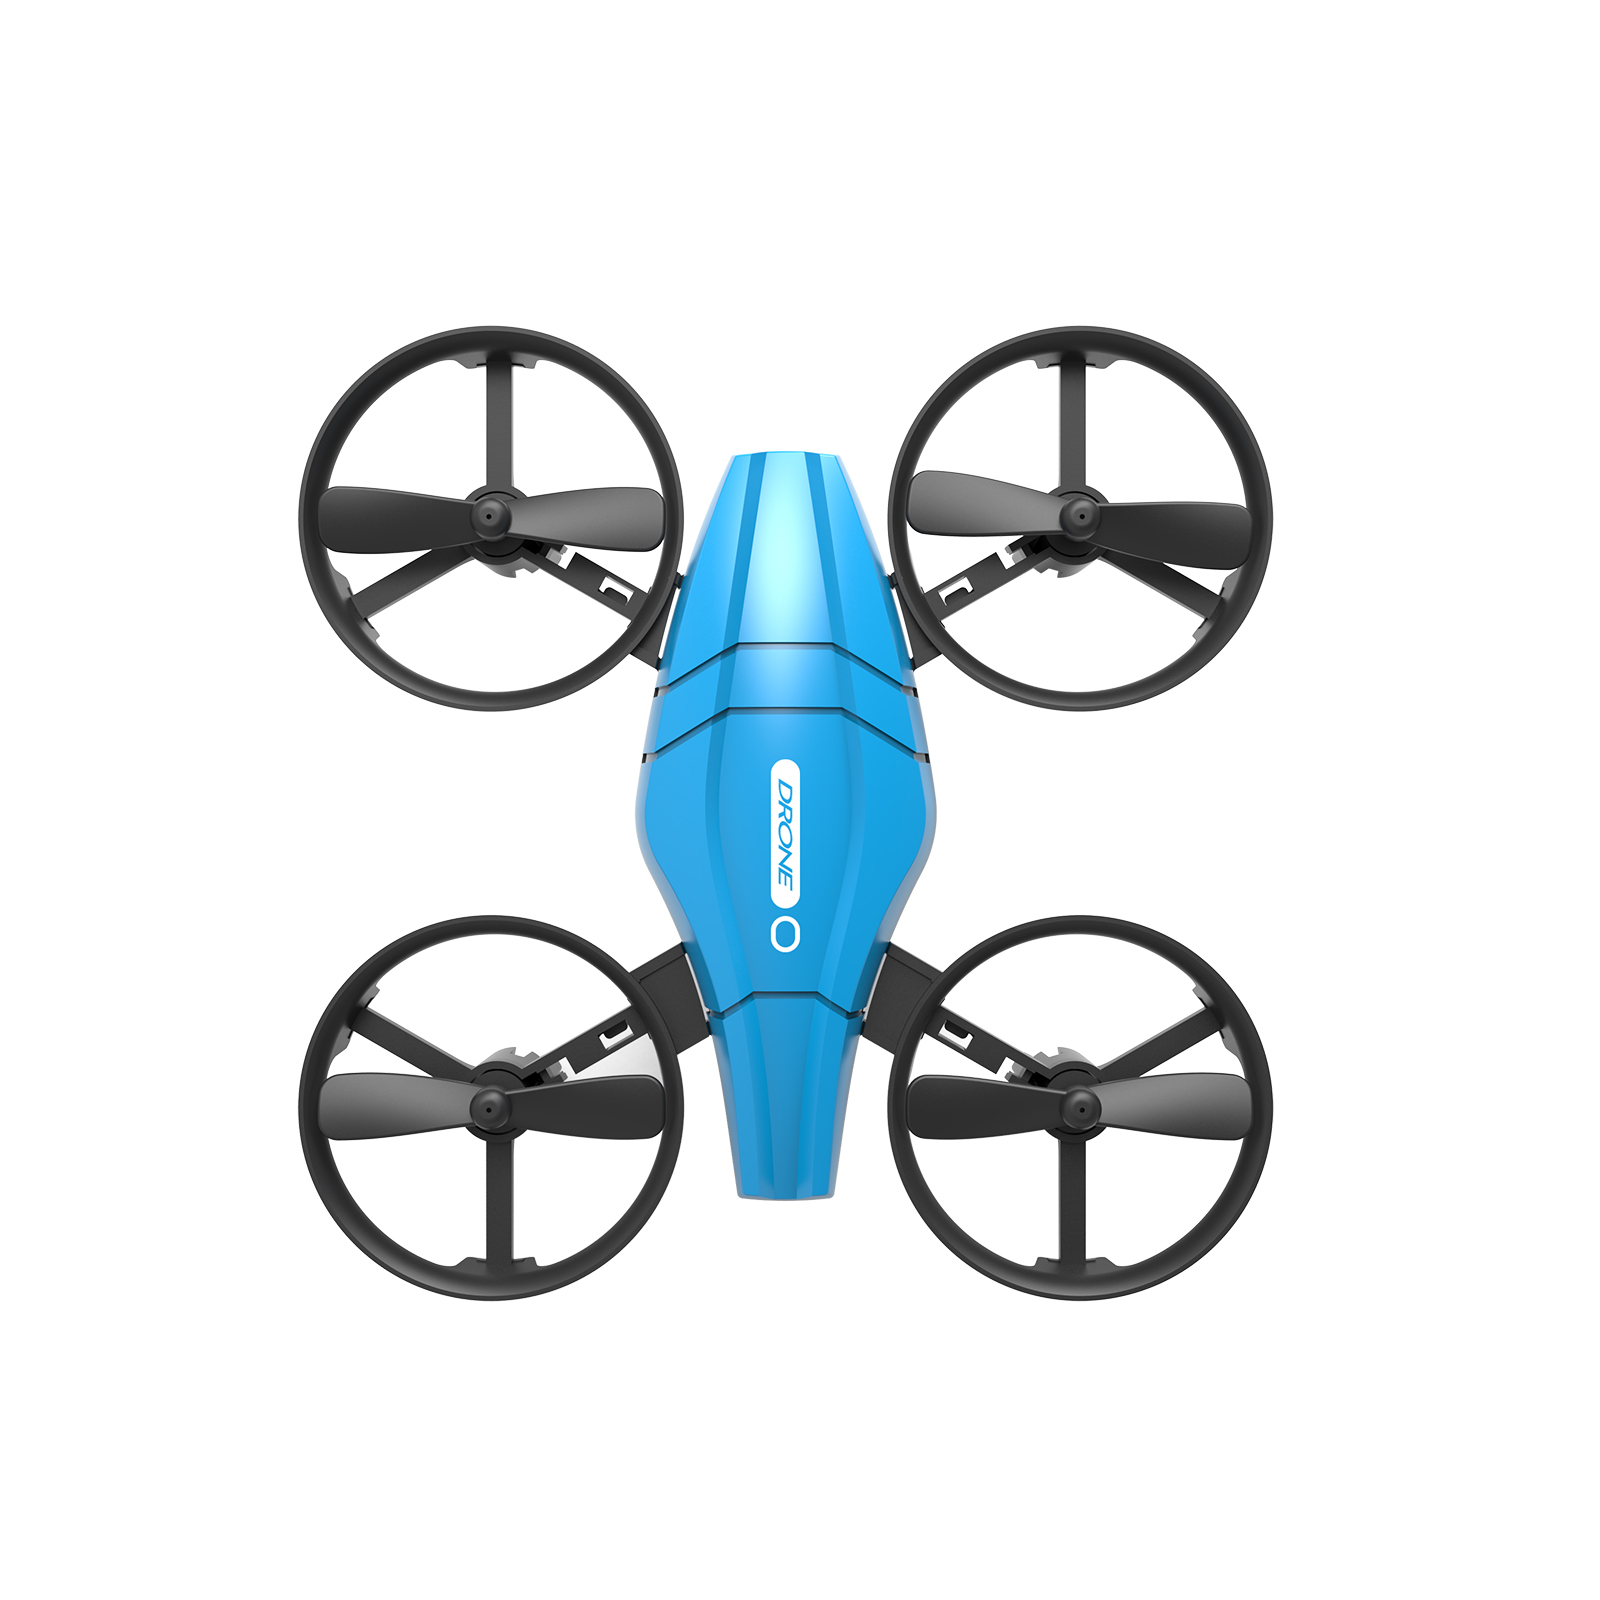 GT1 Drone Hot Selling Radio Control Flying Toys 100M Control Distance 4CH Mini RC Quadcopter Drones